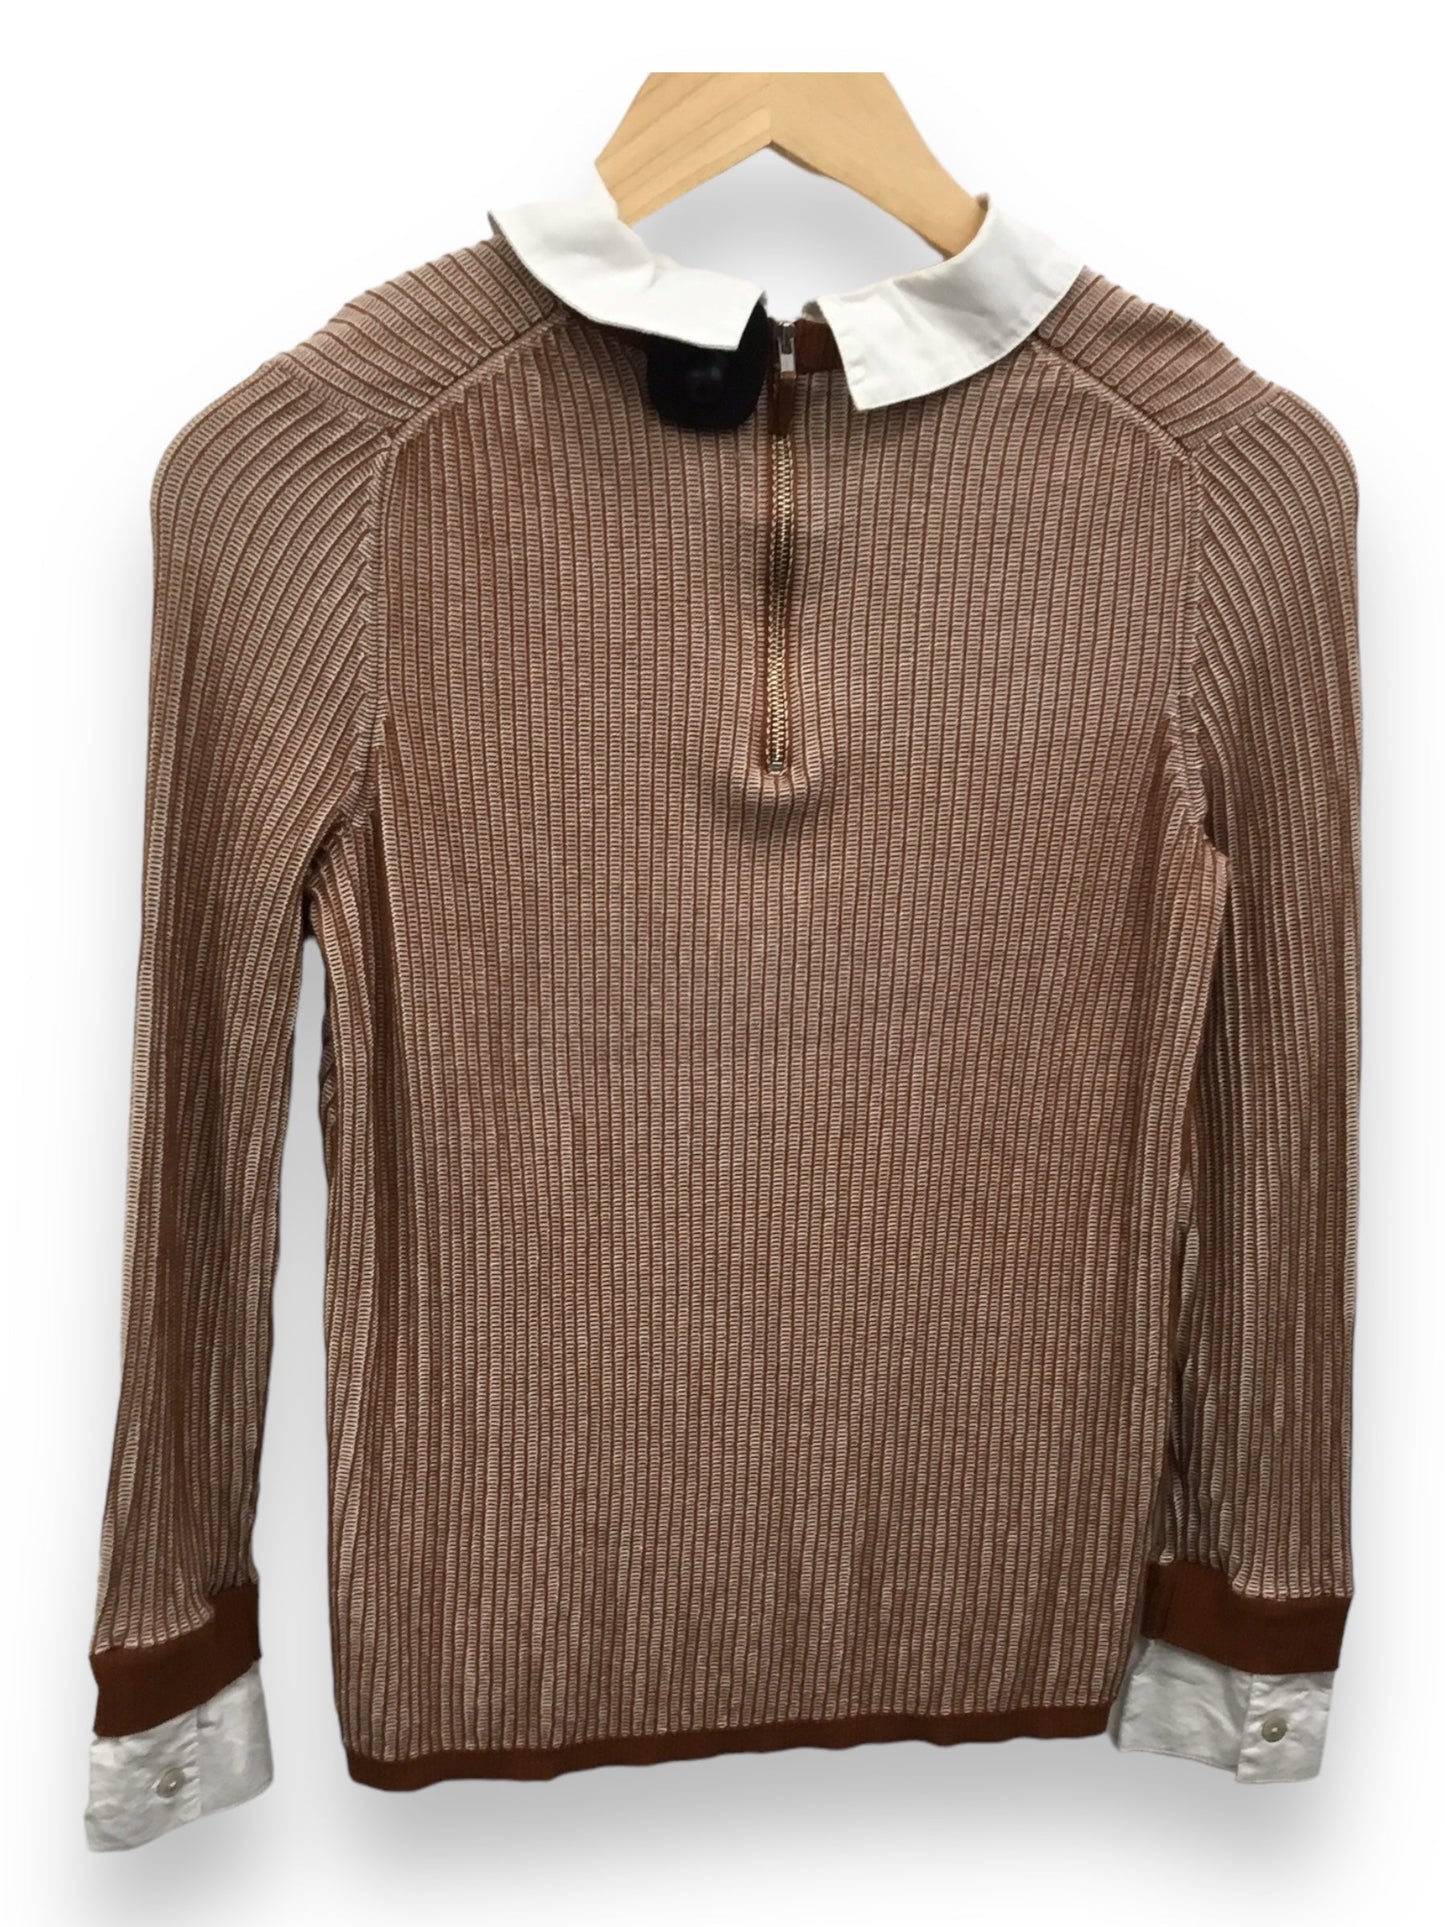 Brown & White Top Long Sleeve Foxcroft, Size Petite   S